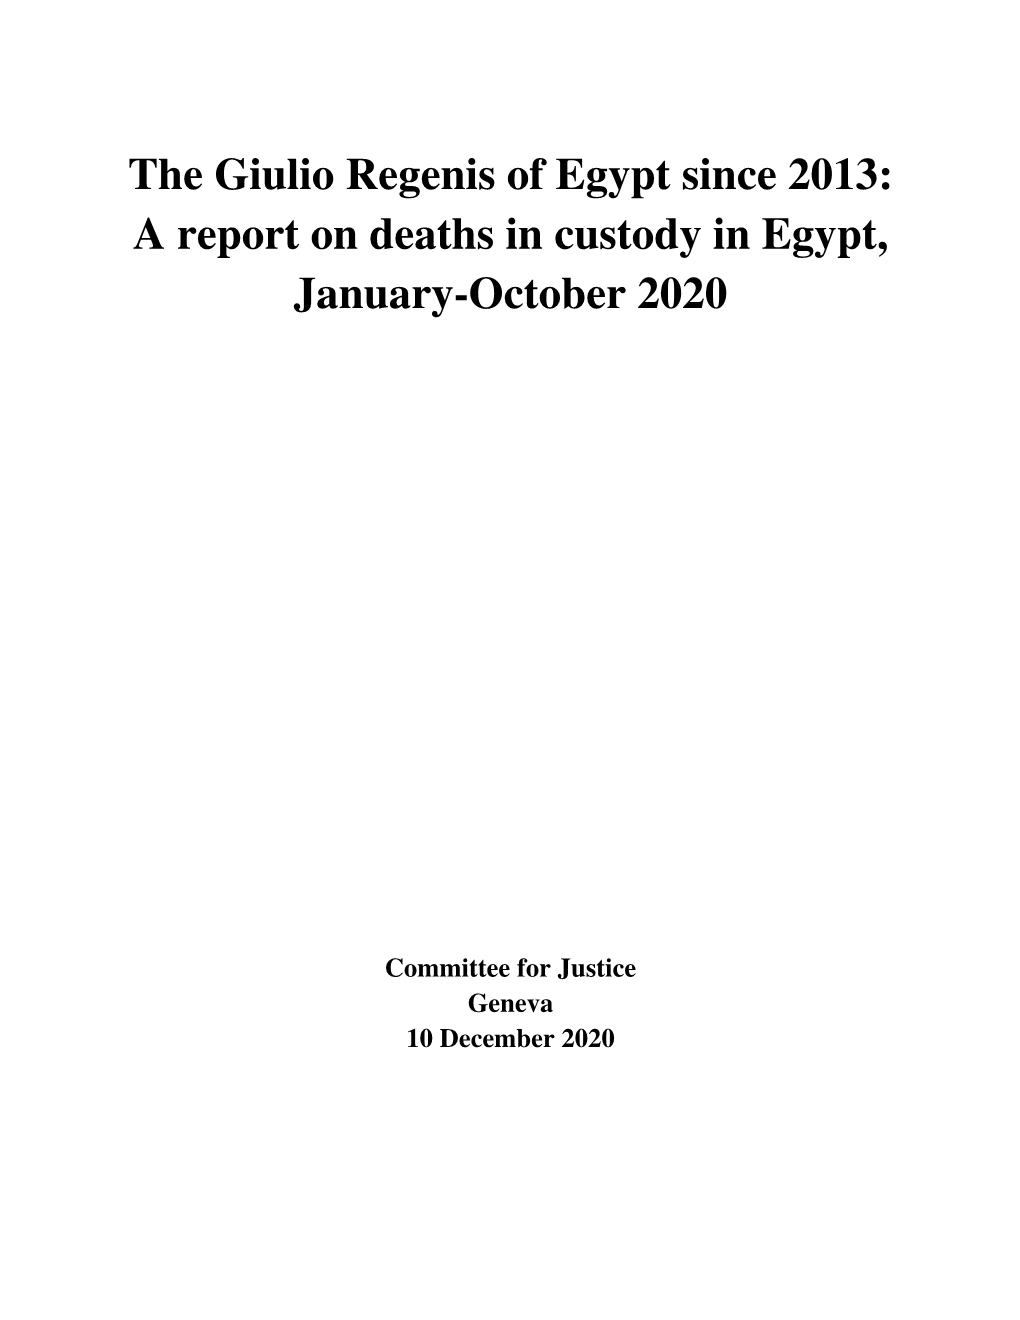 The Giulio Regenis of Egypt Since 2013: a Report on Deaths in Custody in Egypt, January-October 2020